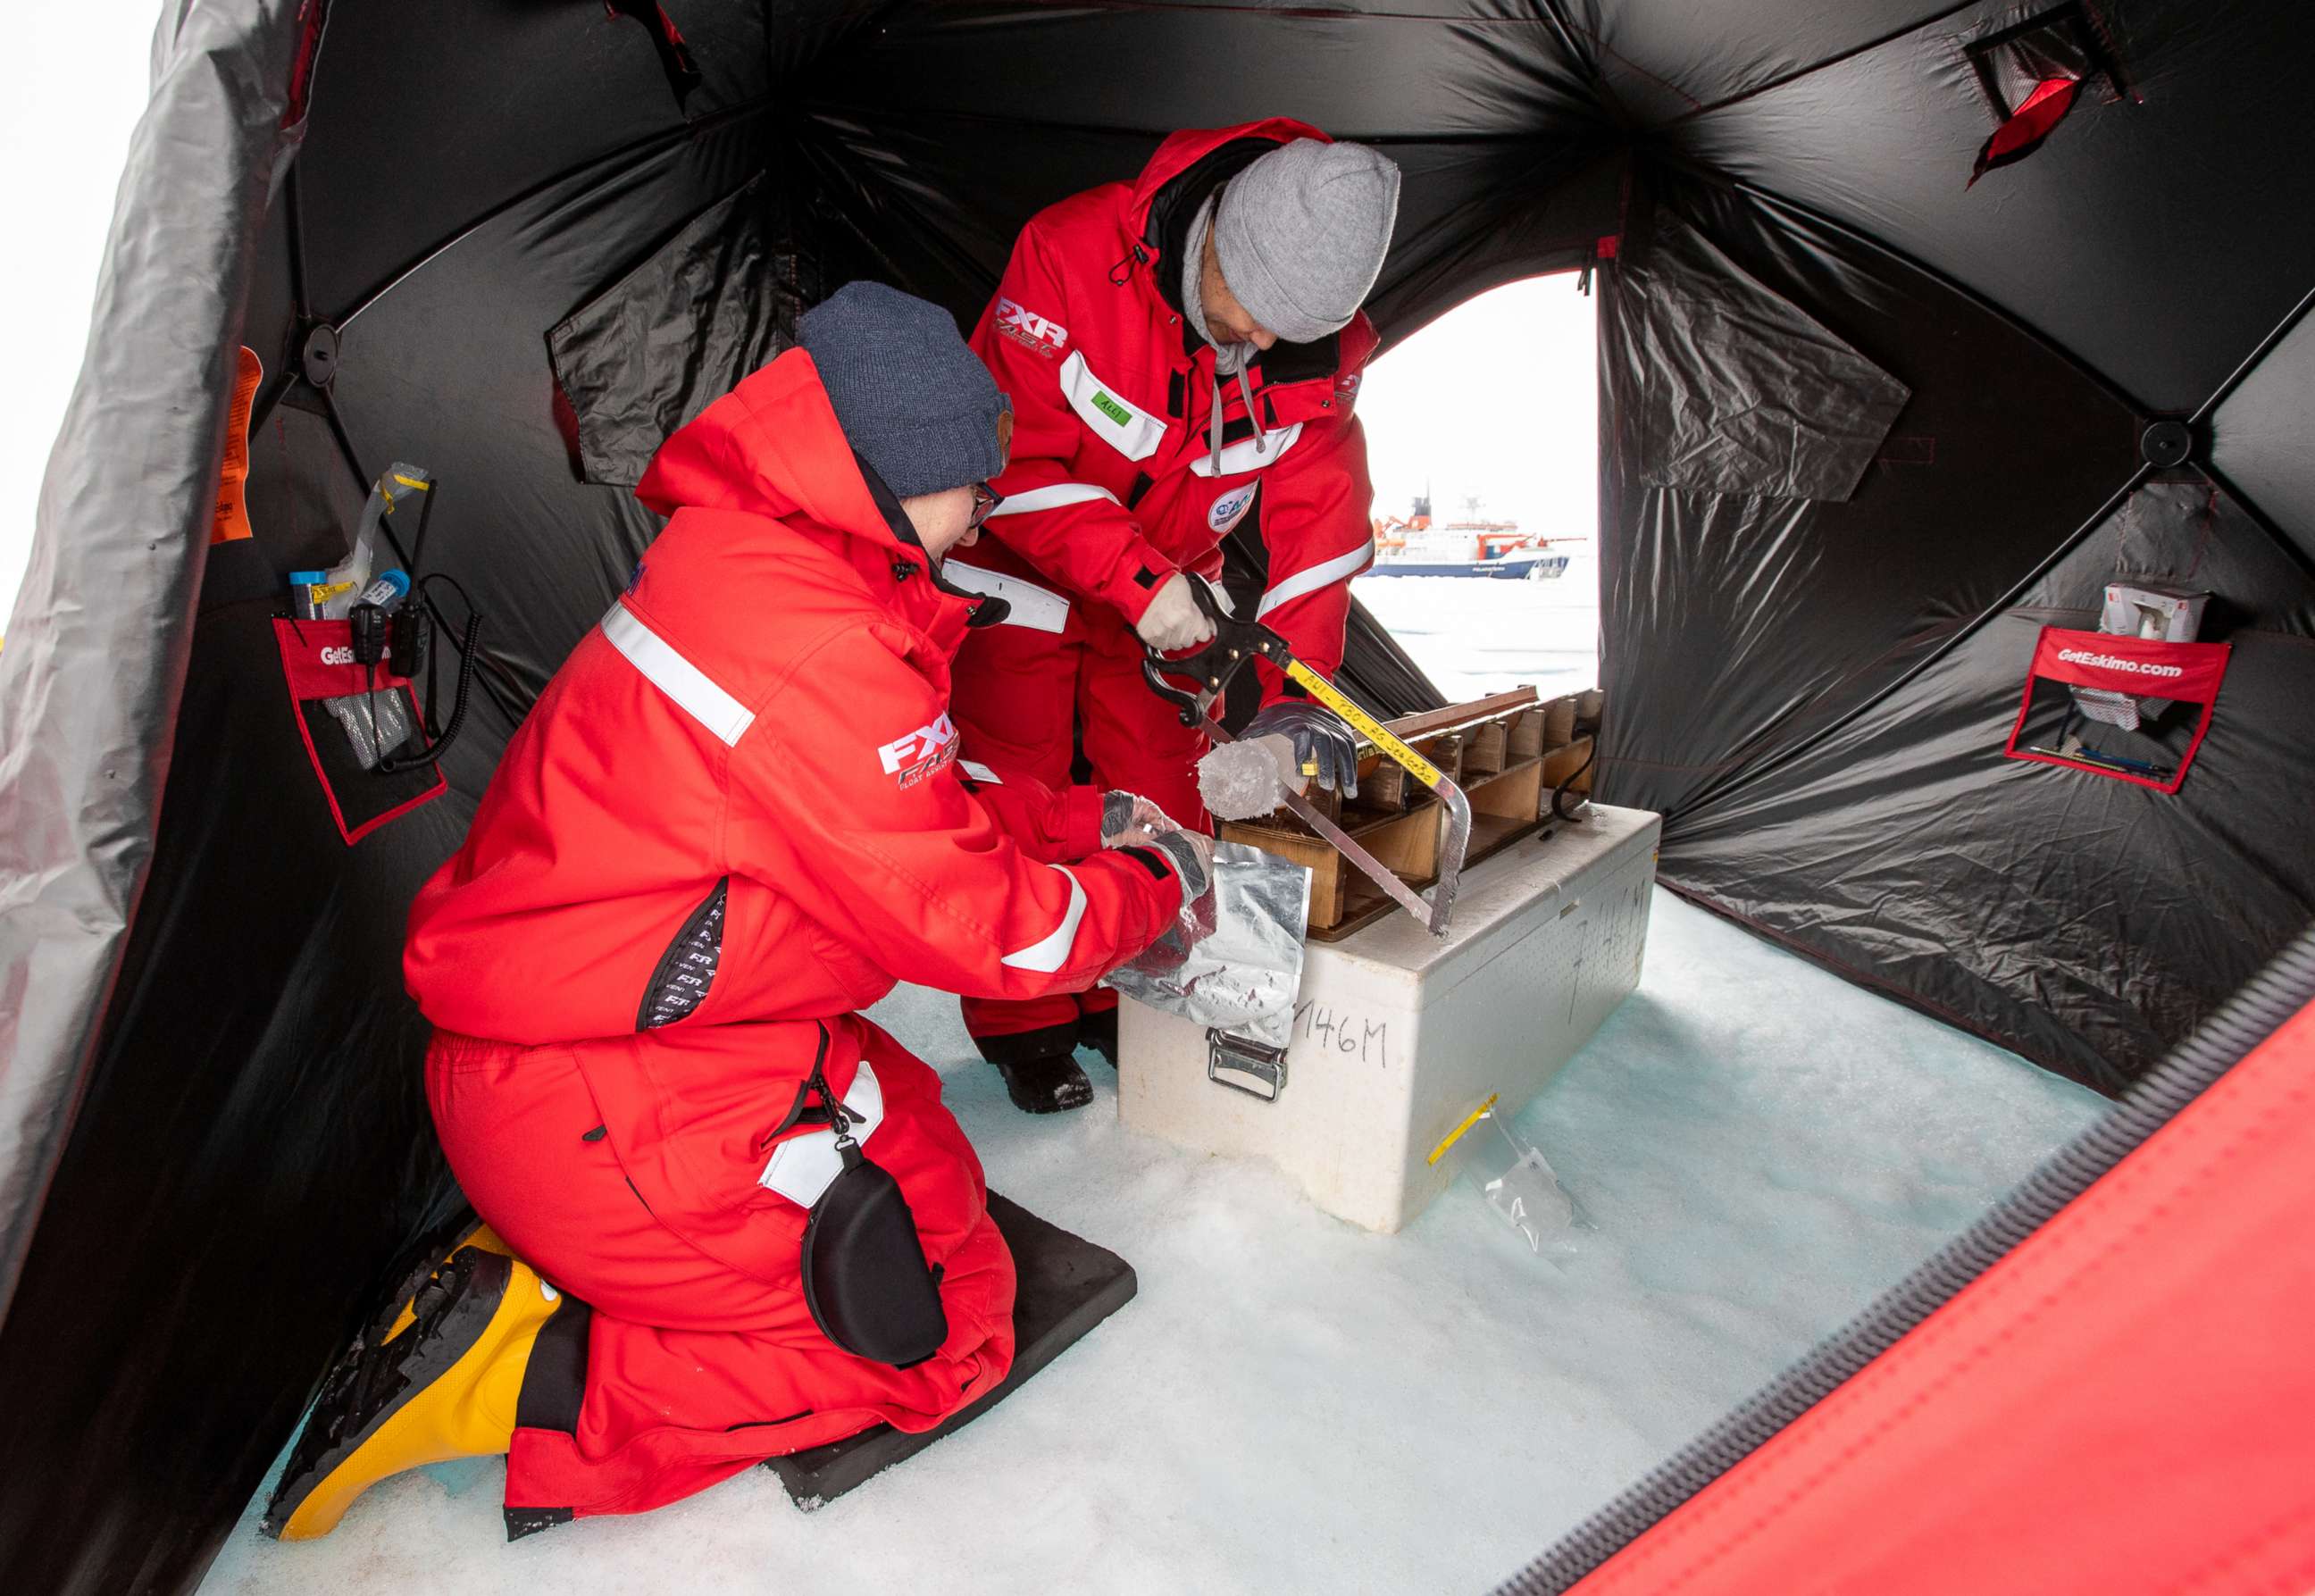 PHOTO: Dr. Allison Fong uses a saw to section off ice core samples in a tent in the Arctic.